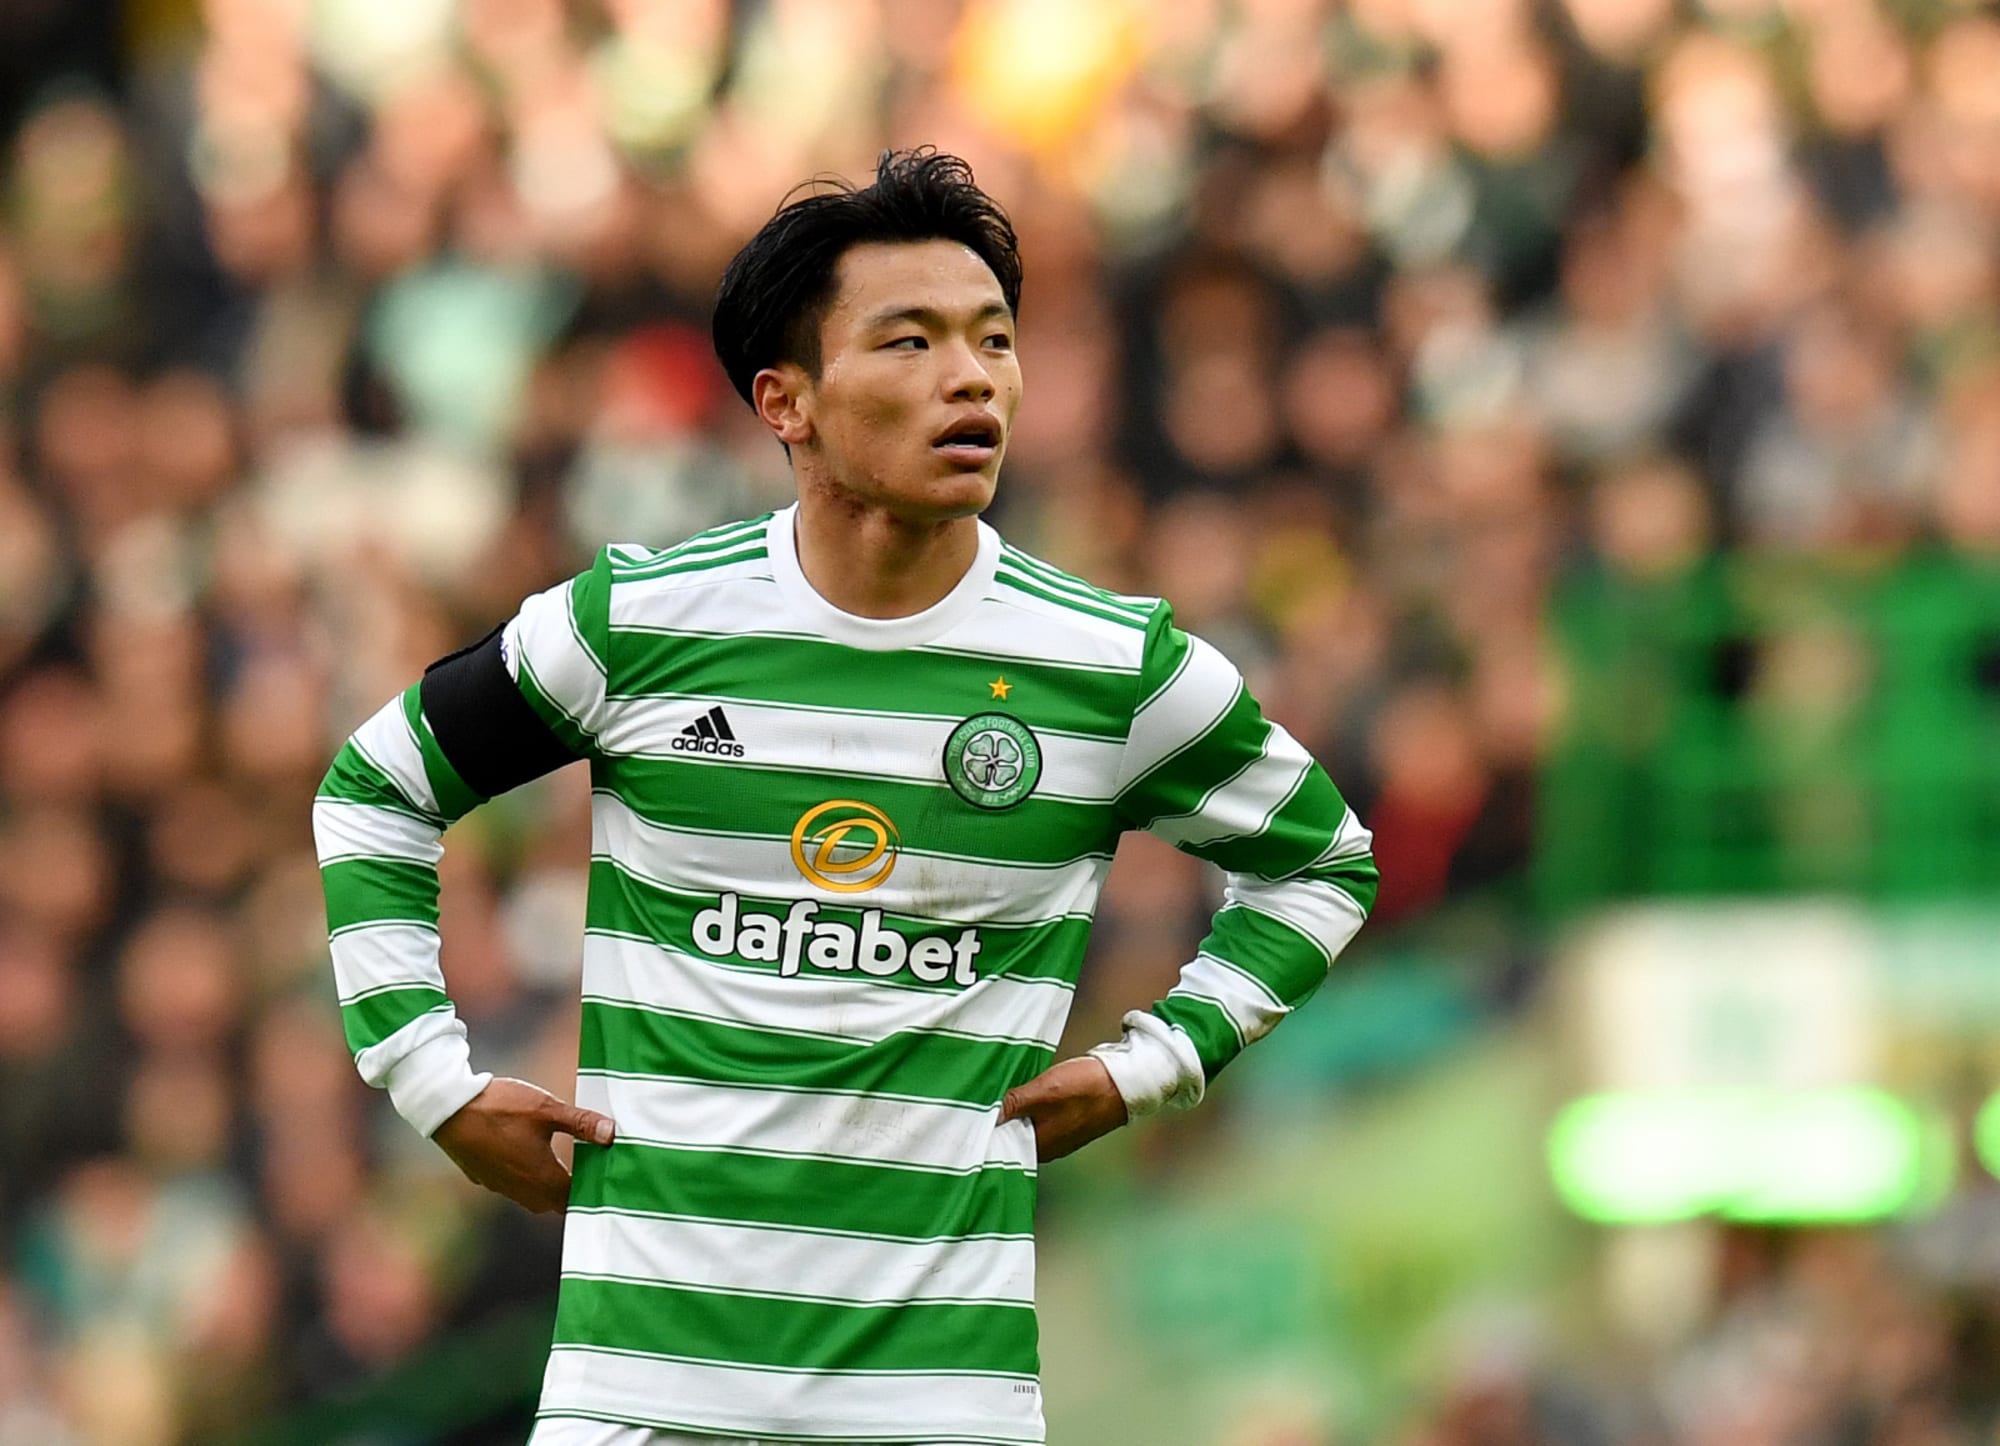 It's taken a bit of time, but Hatate has shown he's the Reo deal for Celtic